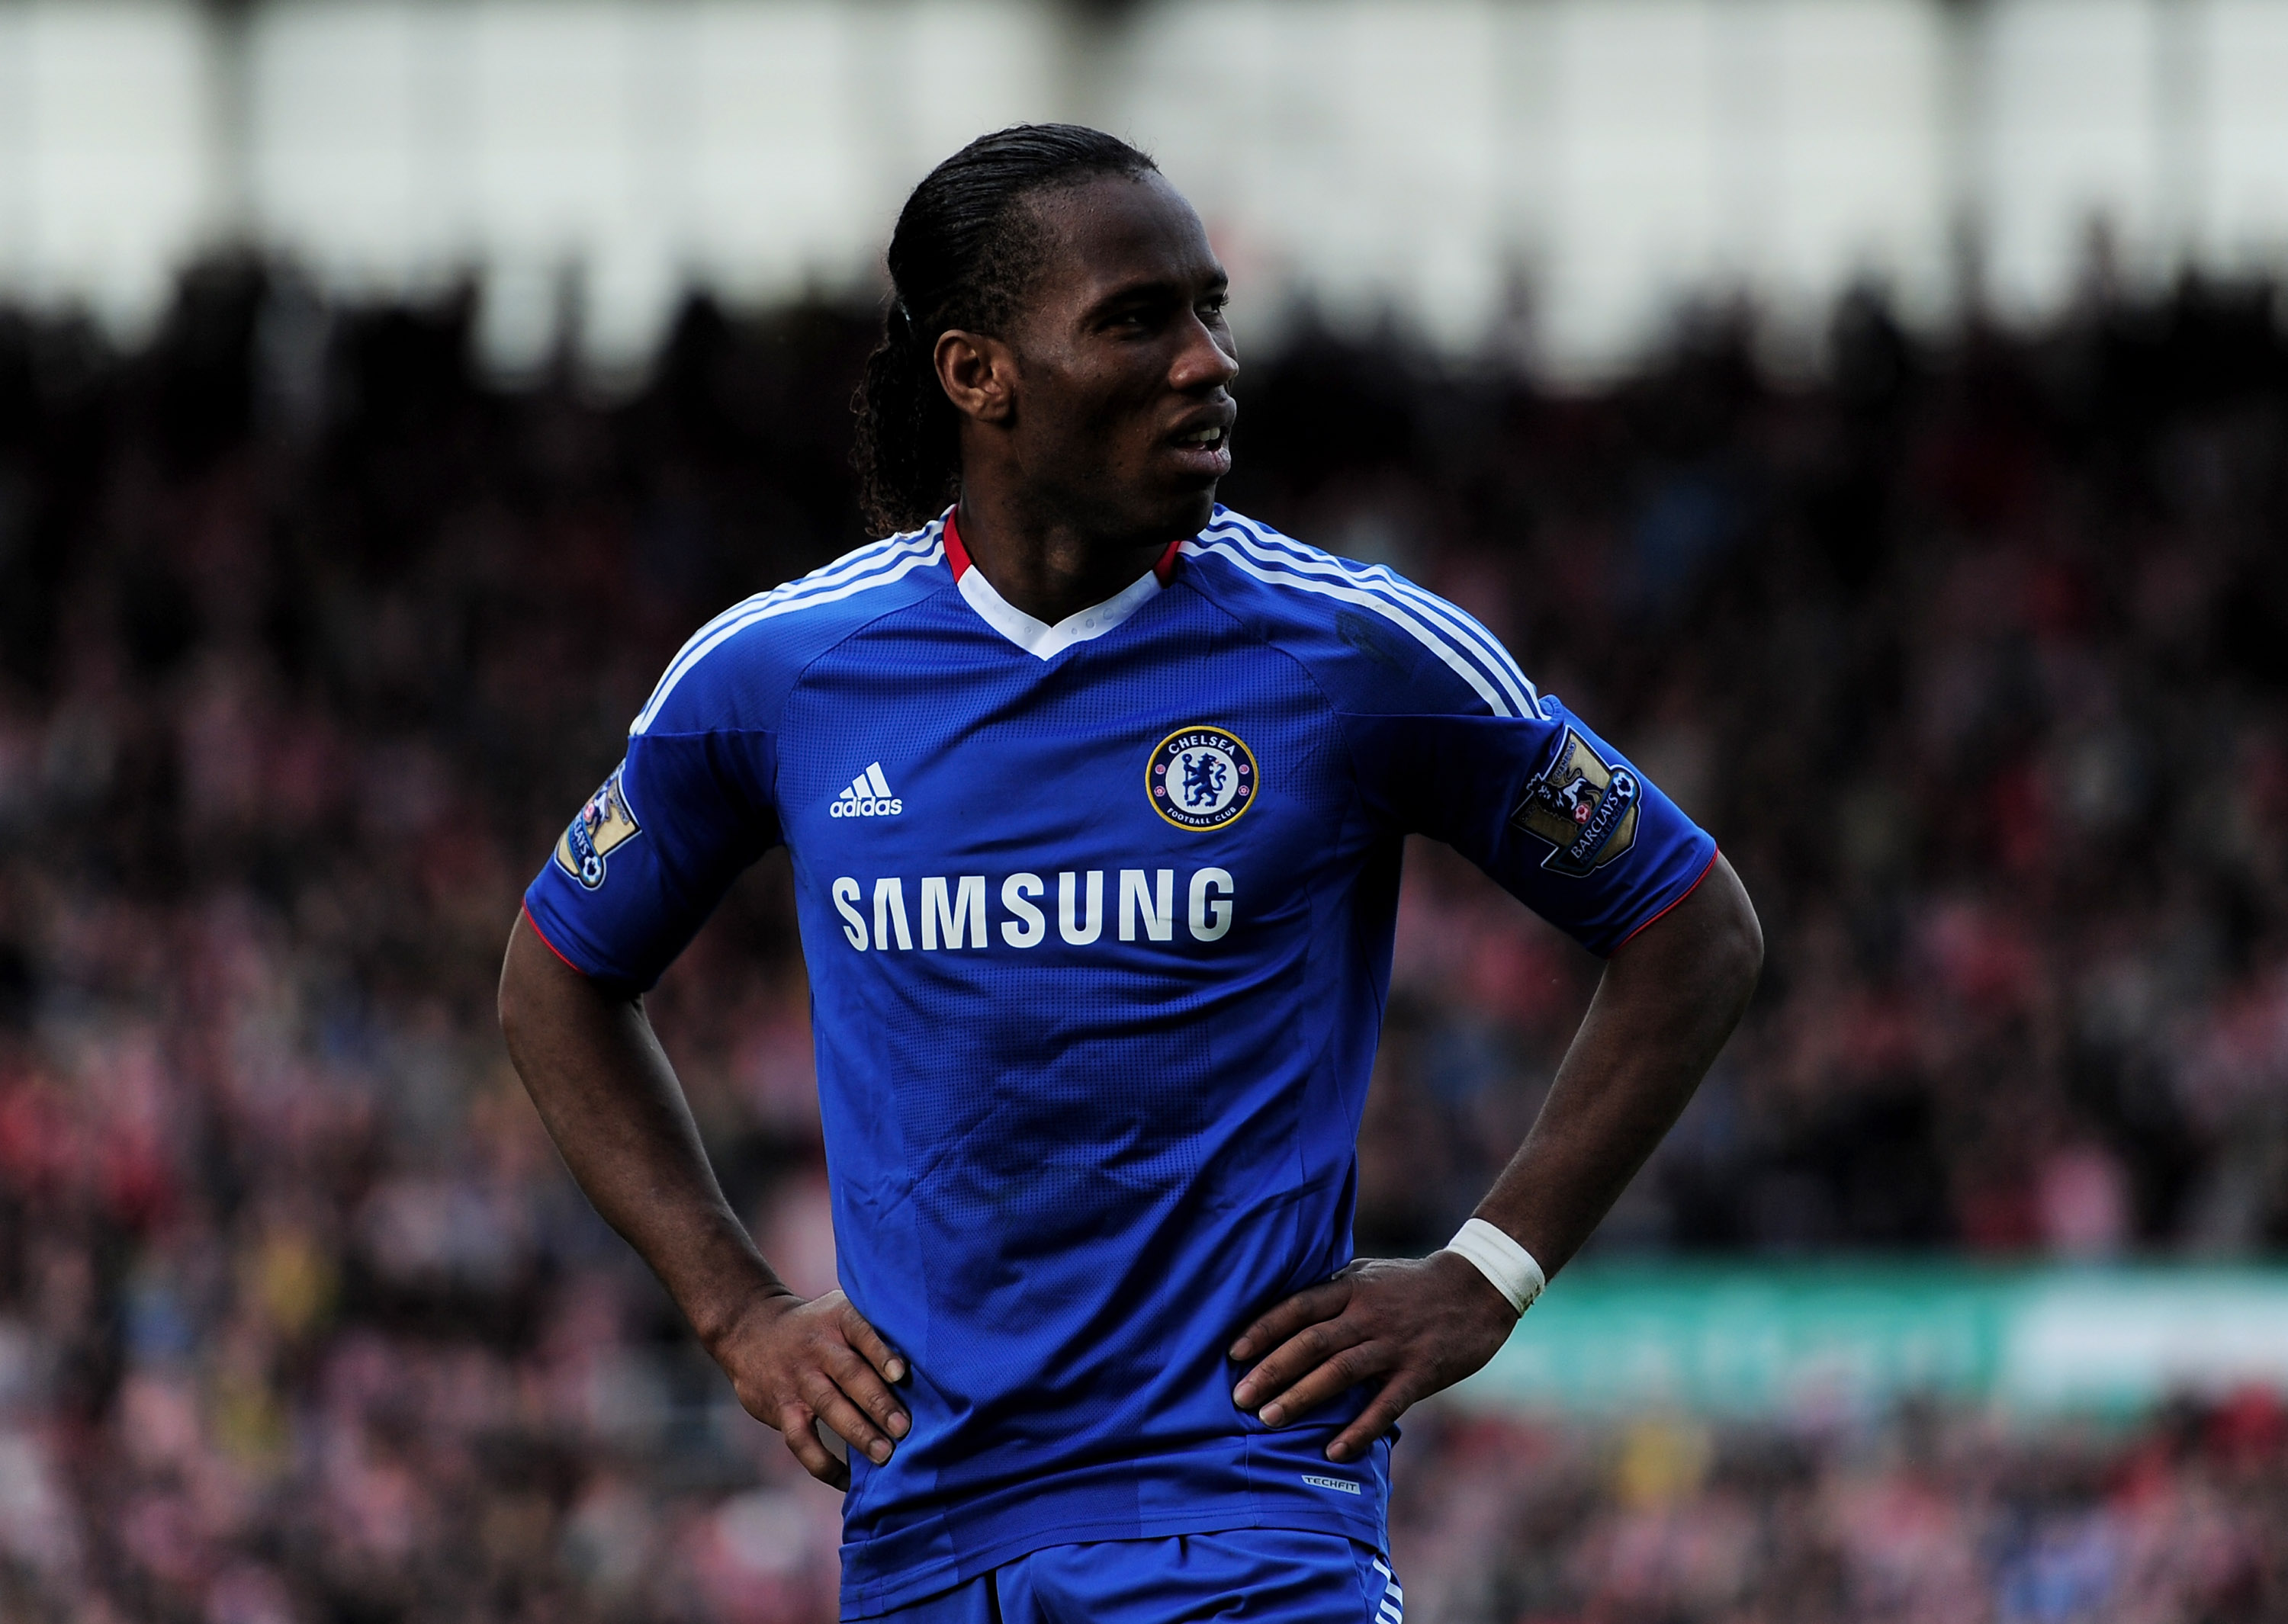 STOKE ON TRENT, ENGLAND - APRIL 02:  Didier Drogba of Chelsea reacts to a missed chance during the Barclays Premier League match between Stoke City and Chelsea at the Britannia Stadium on April 2, 2011 in Stoke on Trent, England.  (Photo by Jamie McDonald